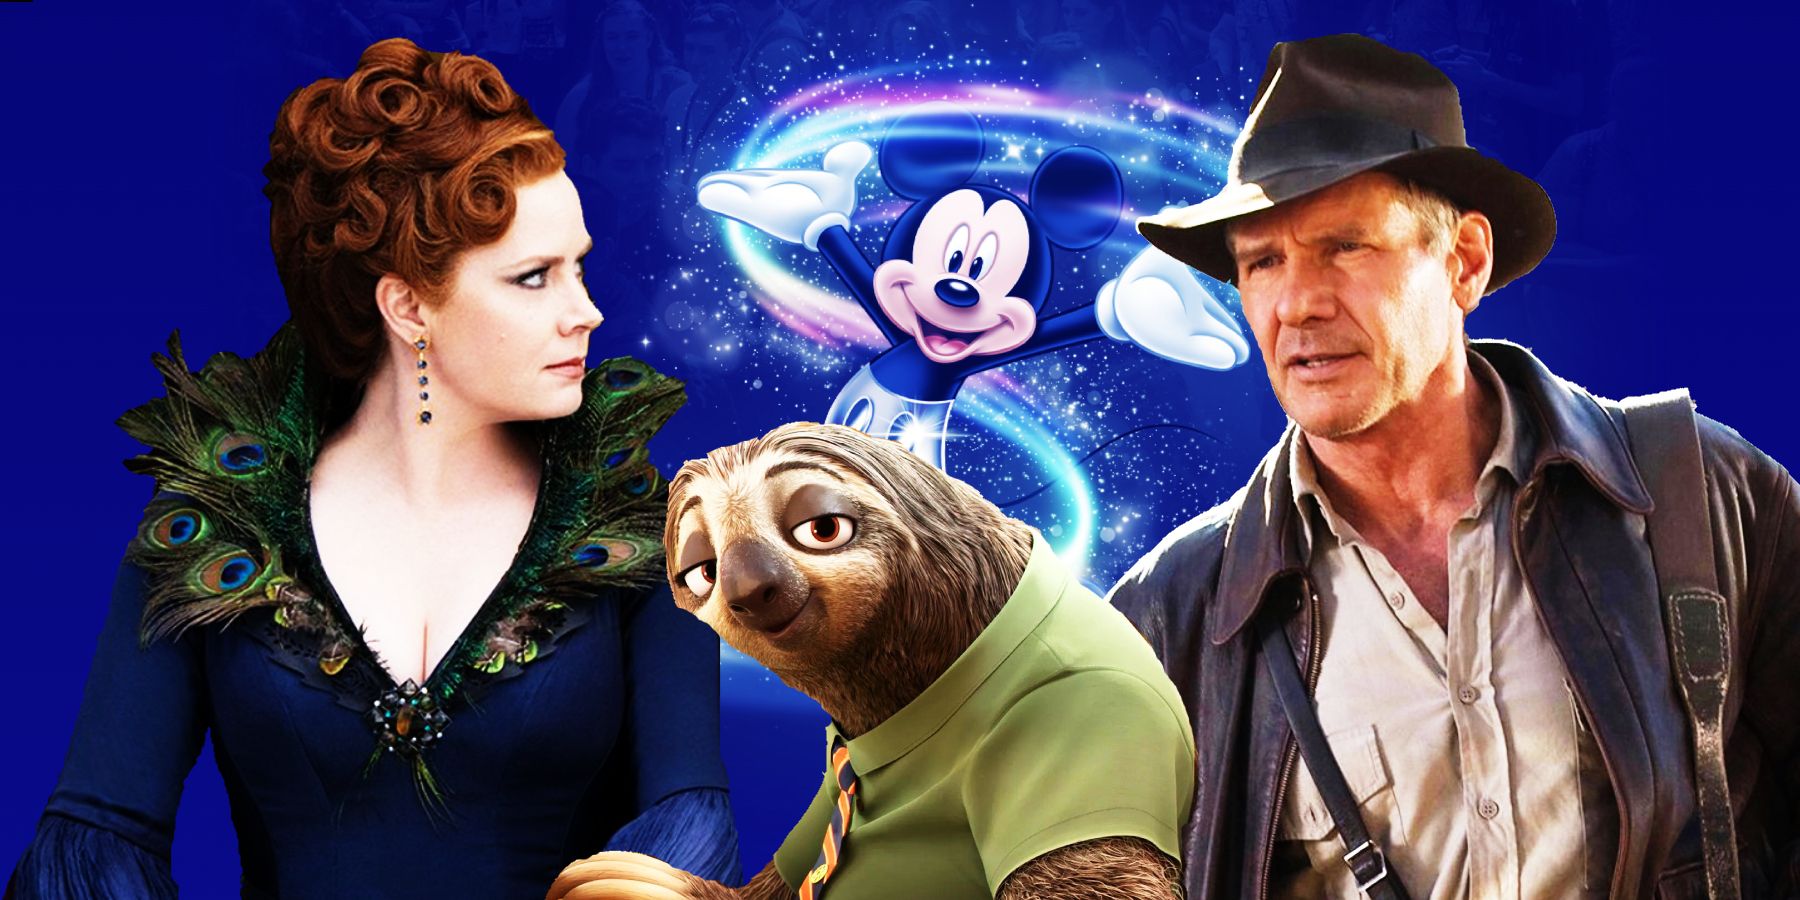 Could Disenchanted, Zootopia+, and Indiana Jones 5 appear at D23 2022?